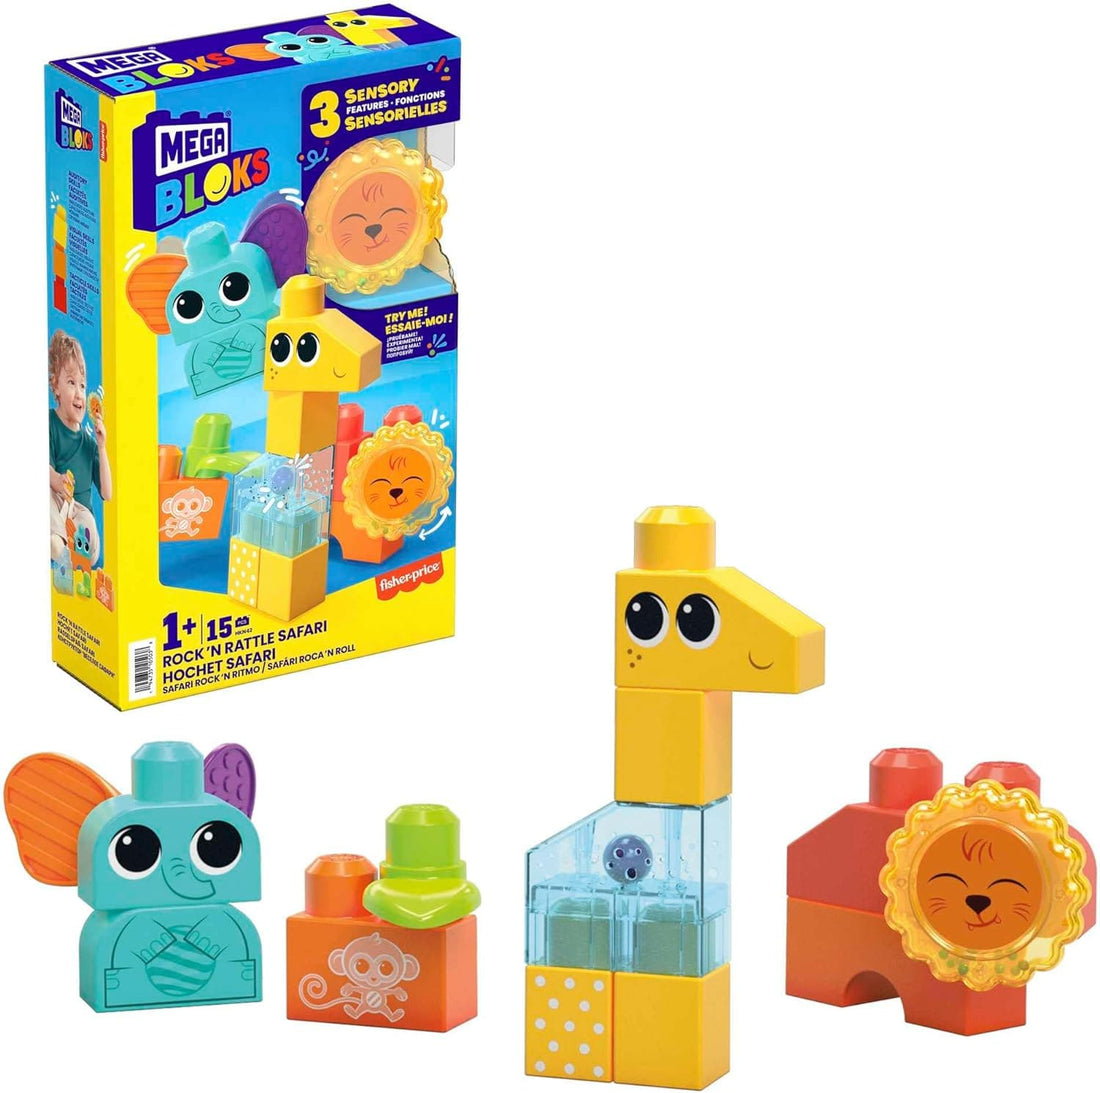 MEGA BLOKS Fisher Price Sensory Building Toy, Rock N Rattle Safari With Rattle and Bells - best price from Maltashopper.com HKN42